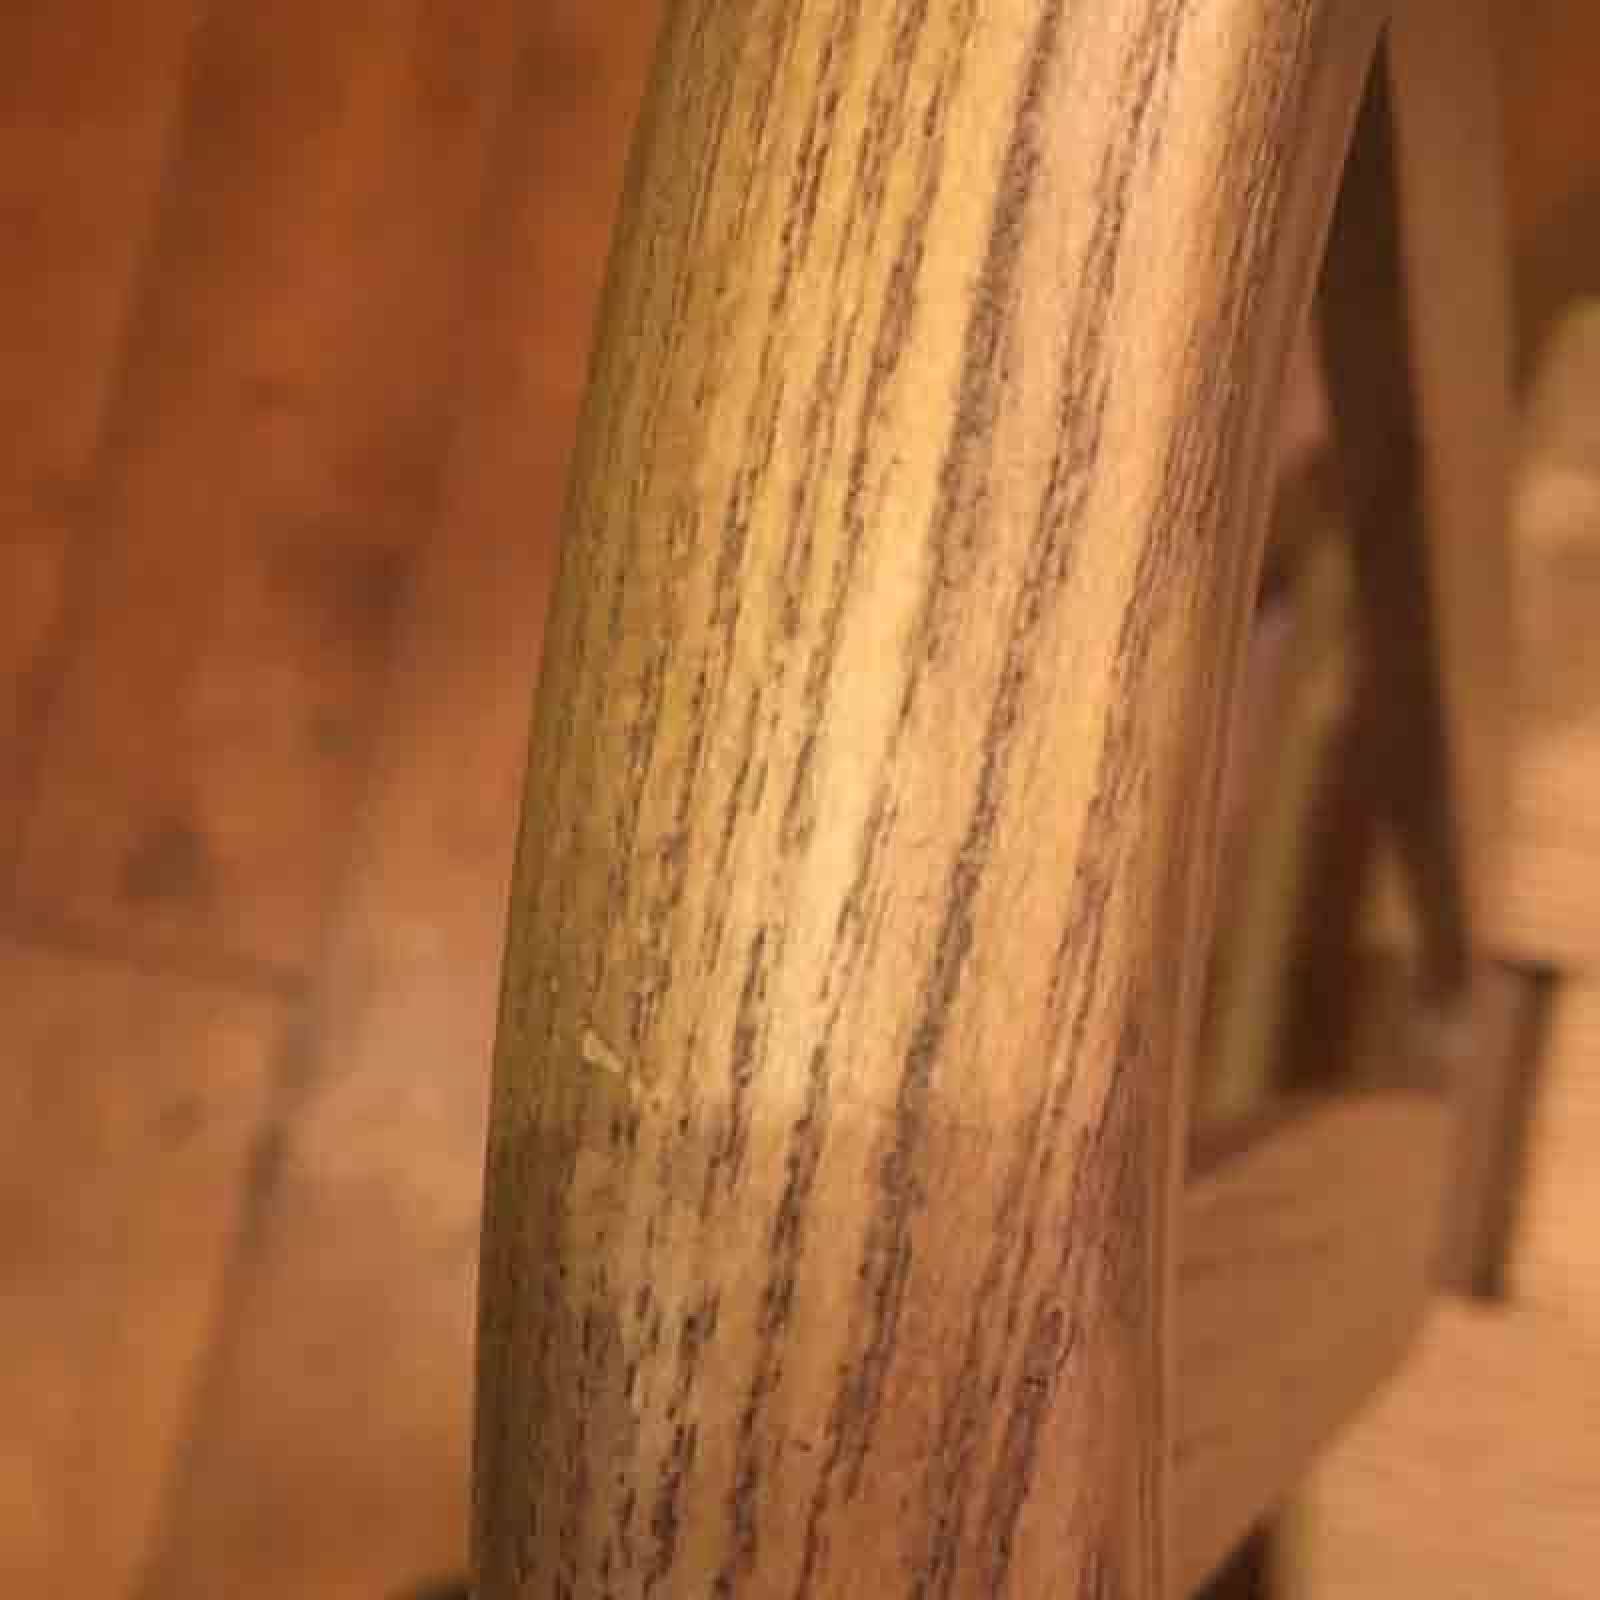 Mid-Century Style Curve Back Elm Chair - Natural thumbnails